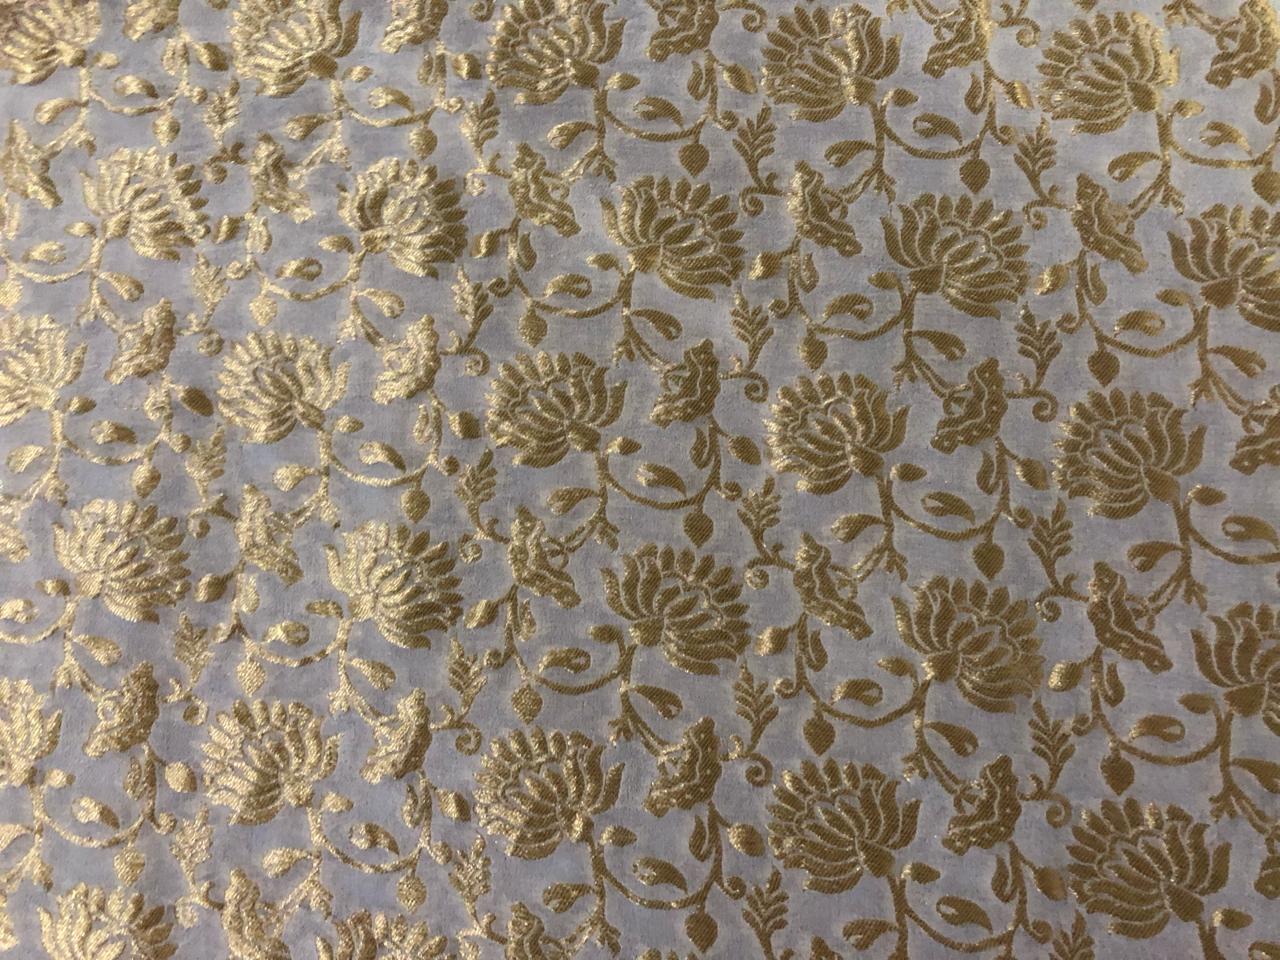 100% Silk Brocade fabric available in 3 colors white ivory and silver /white ivory and gold/white ivory and white gold BRO932[1/2/3]